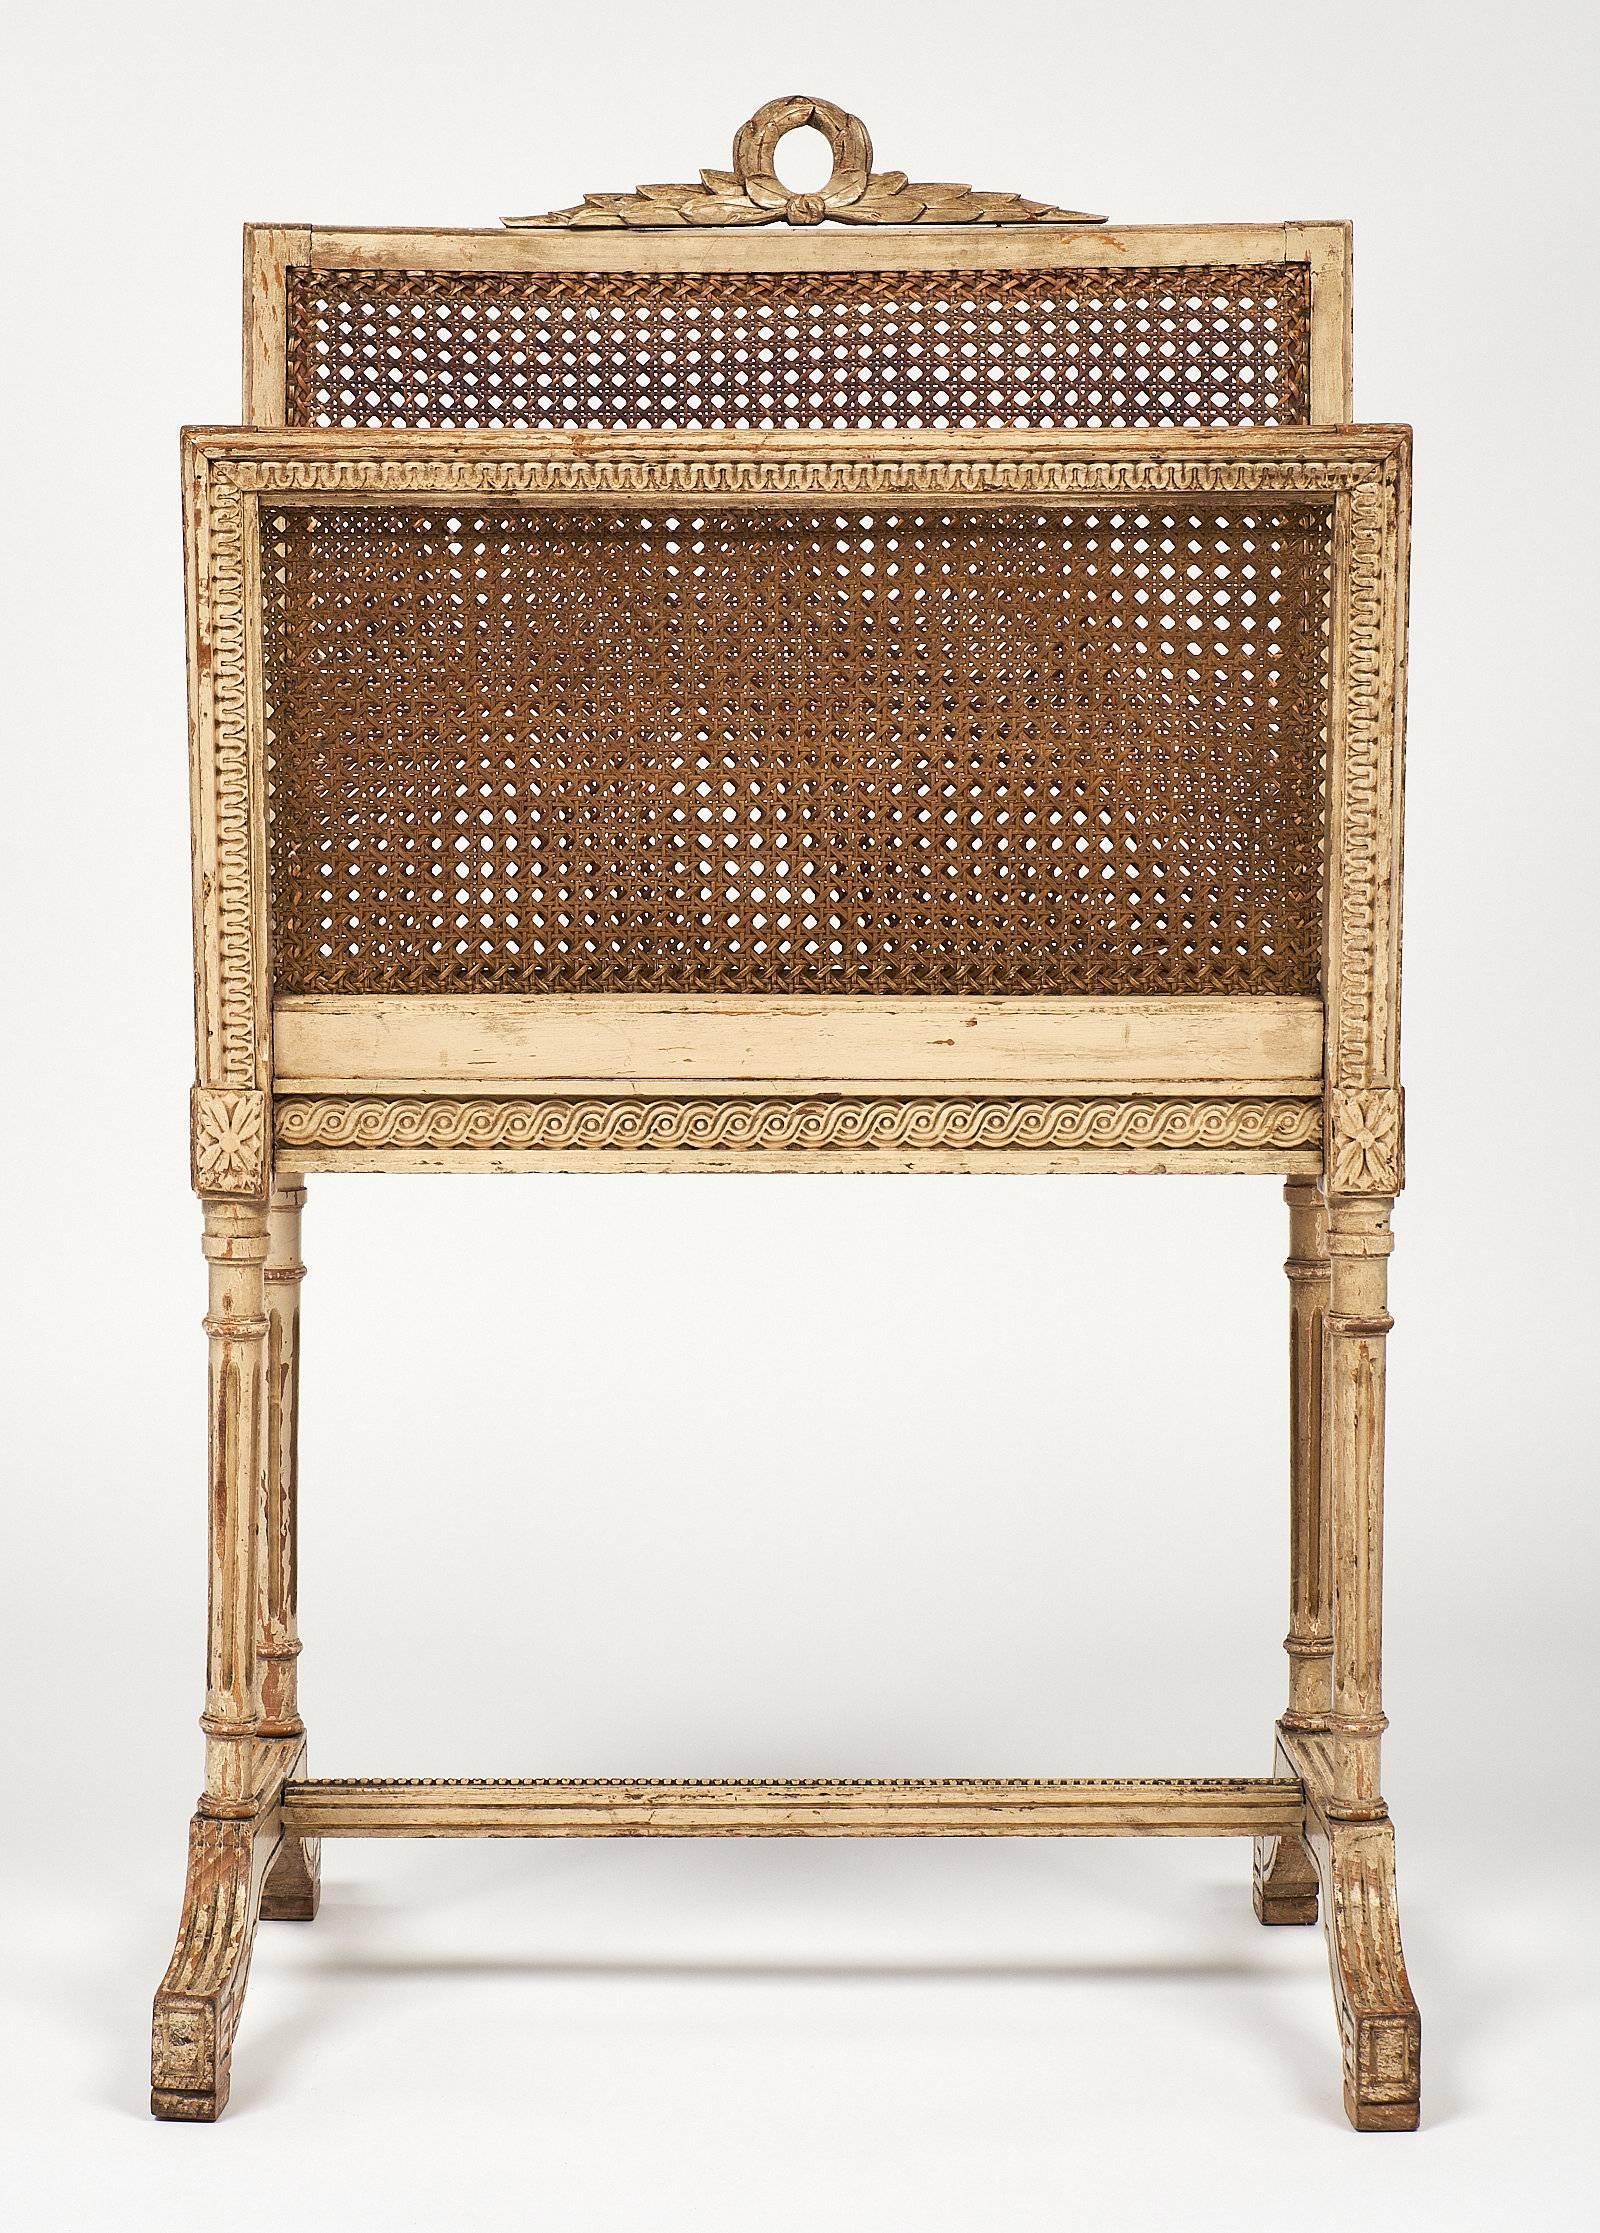 An elegant, neoclassical style magazine rack with its original ivory color paint and patina. This piece is made of beech wood. The caning is original as well and in beautiful condition, with finely carved floral details and laurel crown.